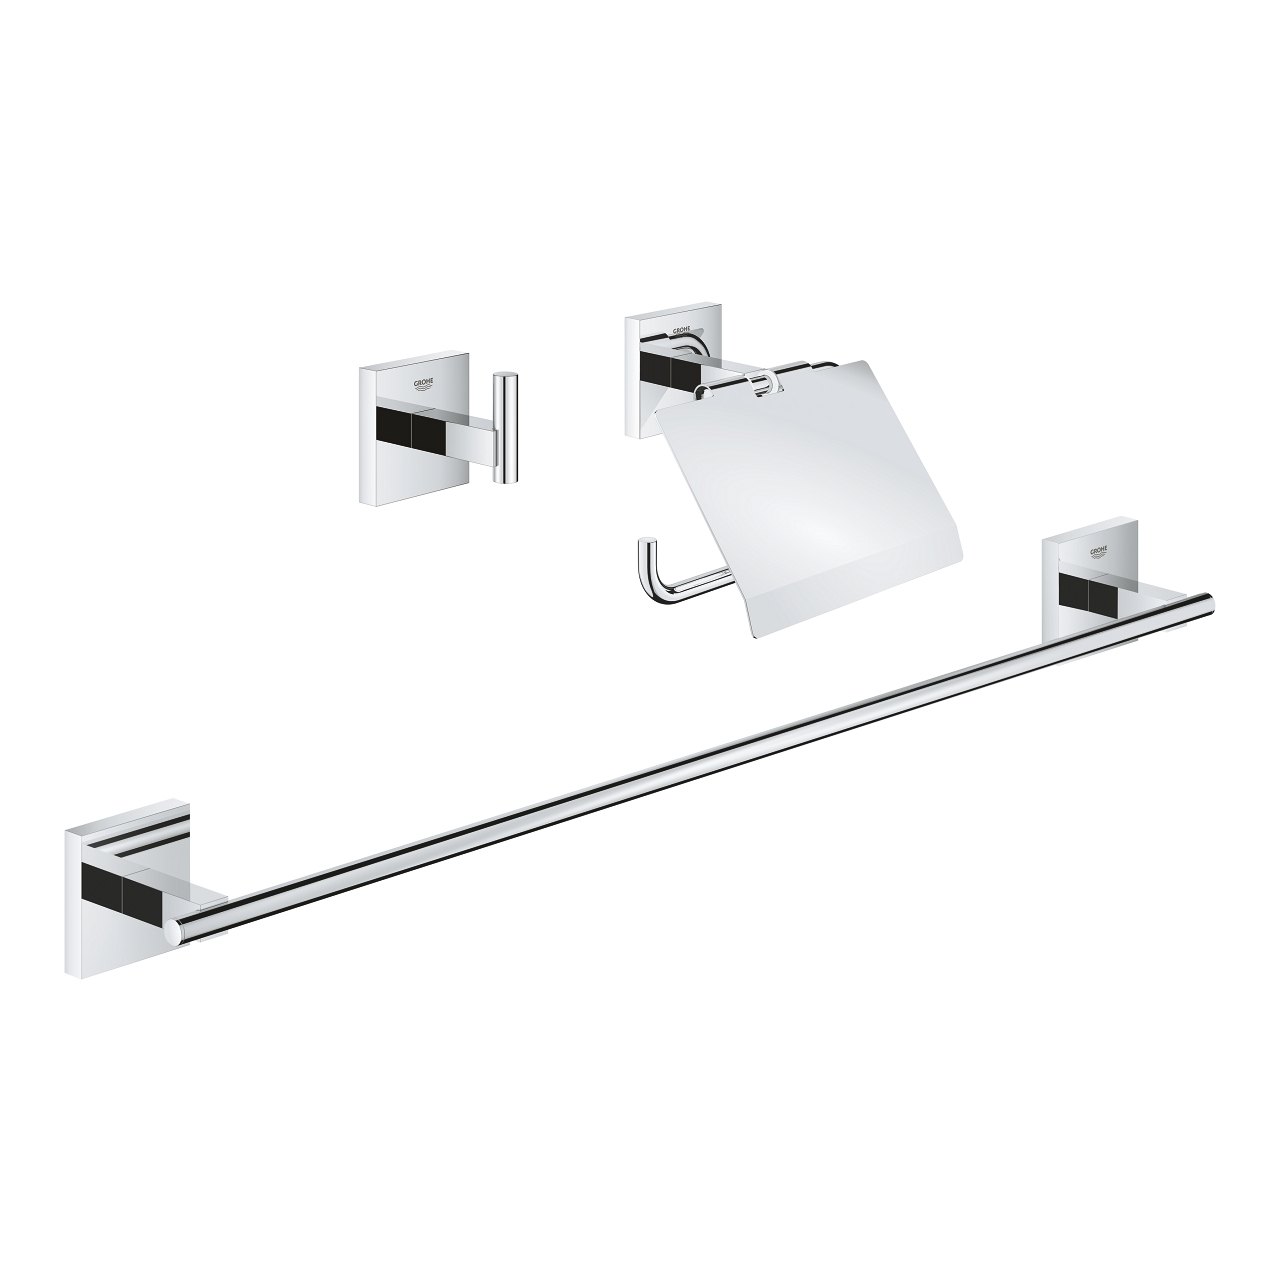 Set accesorii Grohe Start Cube Guest 3-in-1 crom Grohe imagine reduss.ro 2022